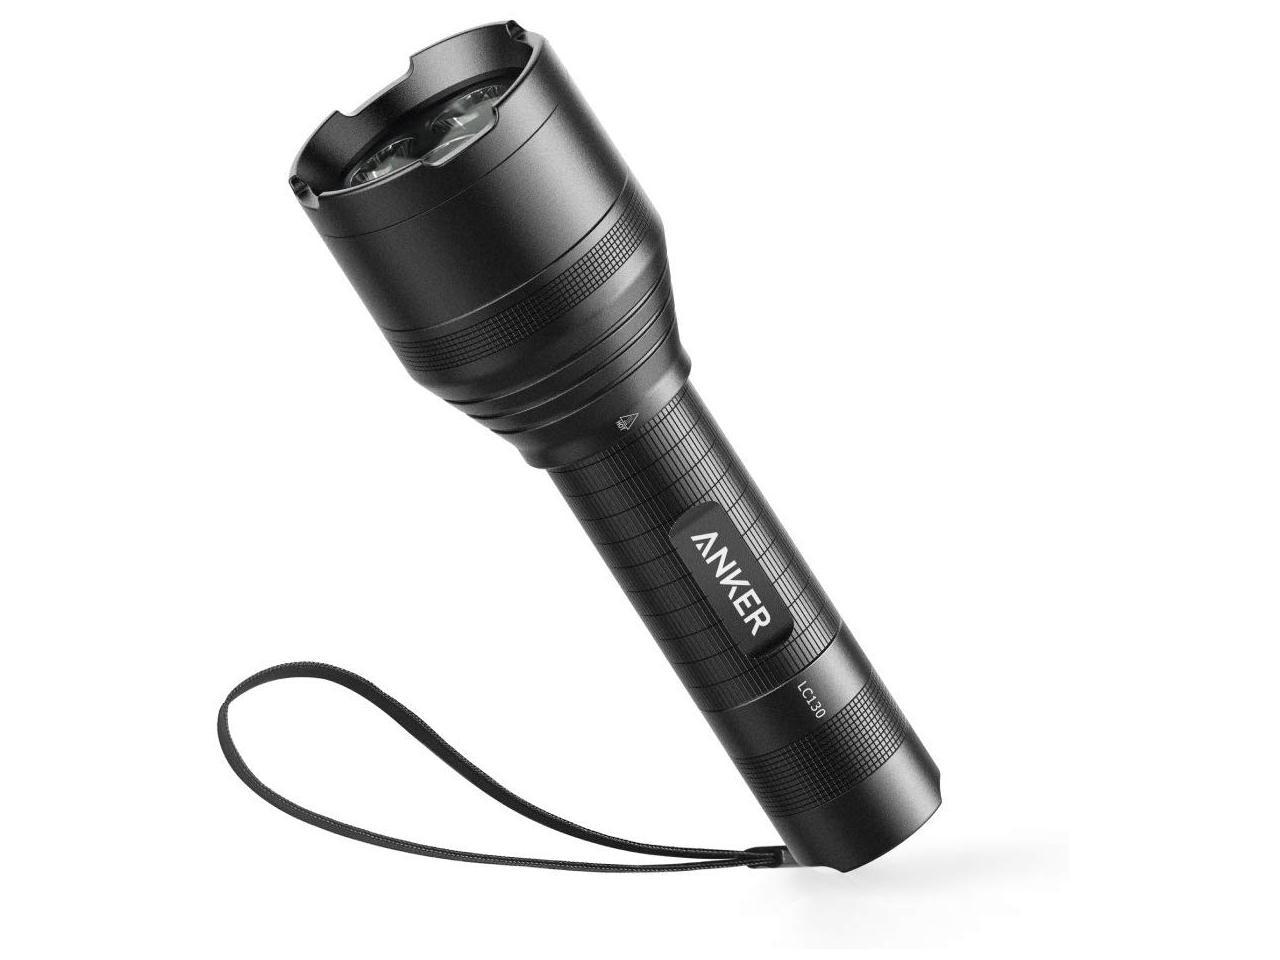 Anker Ultra-Bright Tactical Flashlight, 1300 Lumens, Rechargeable, Water-Resistant, LED with 5 Light Modes